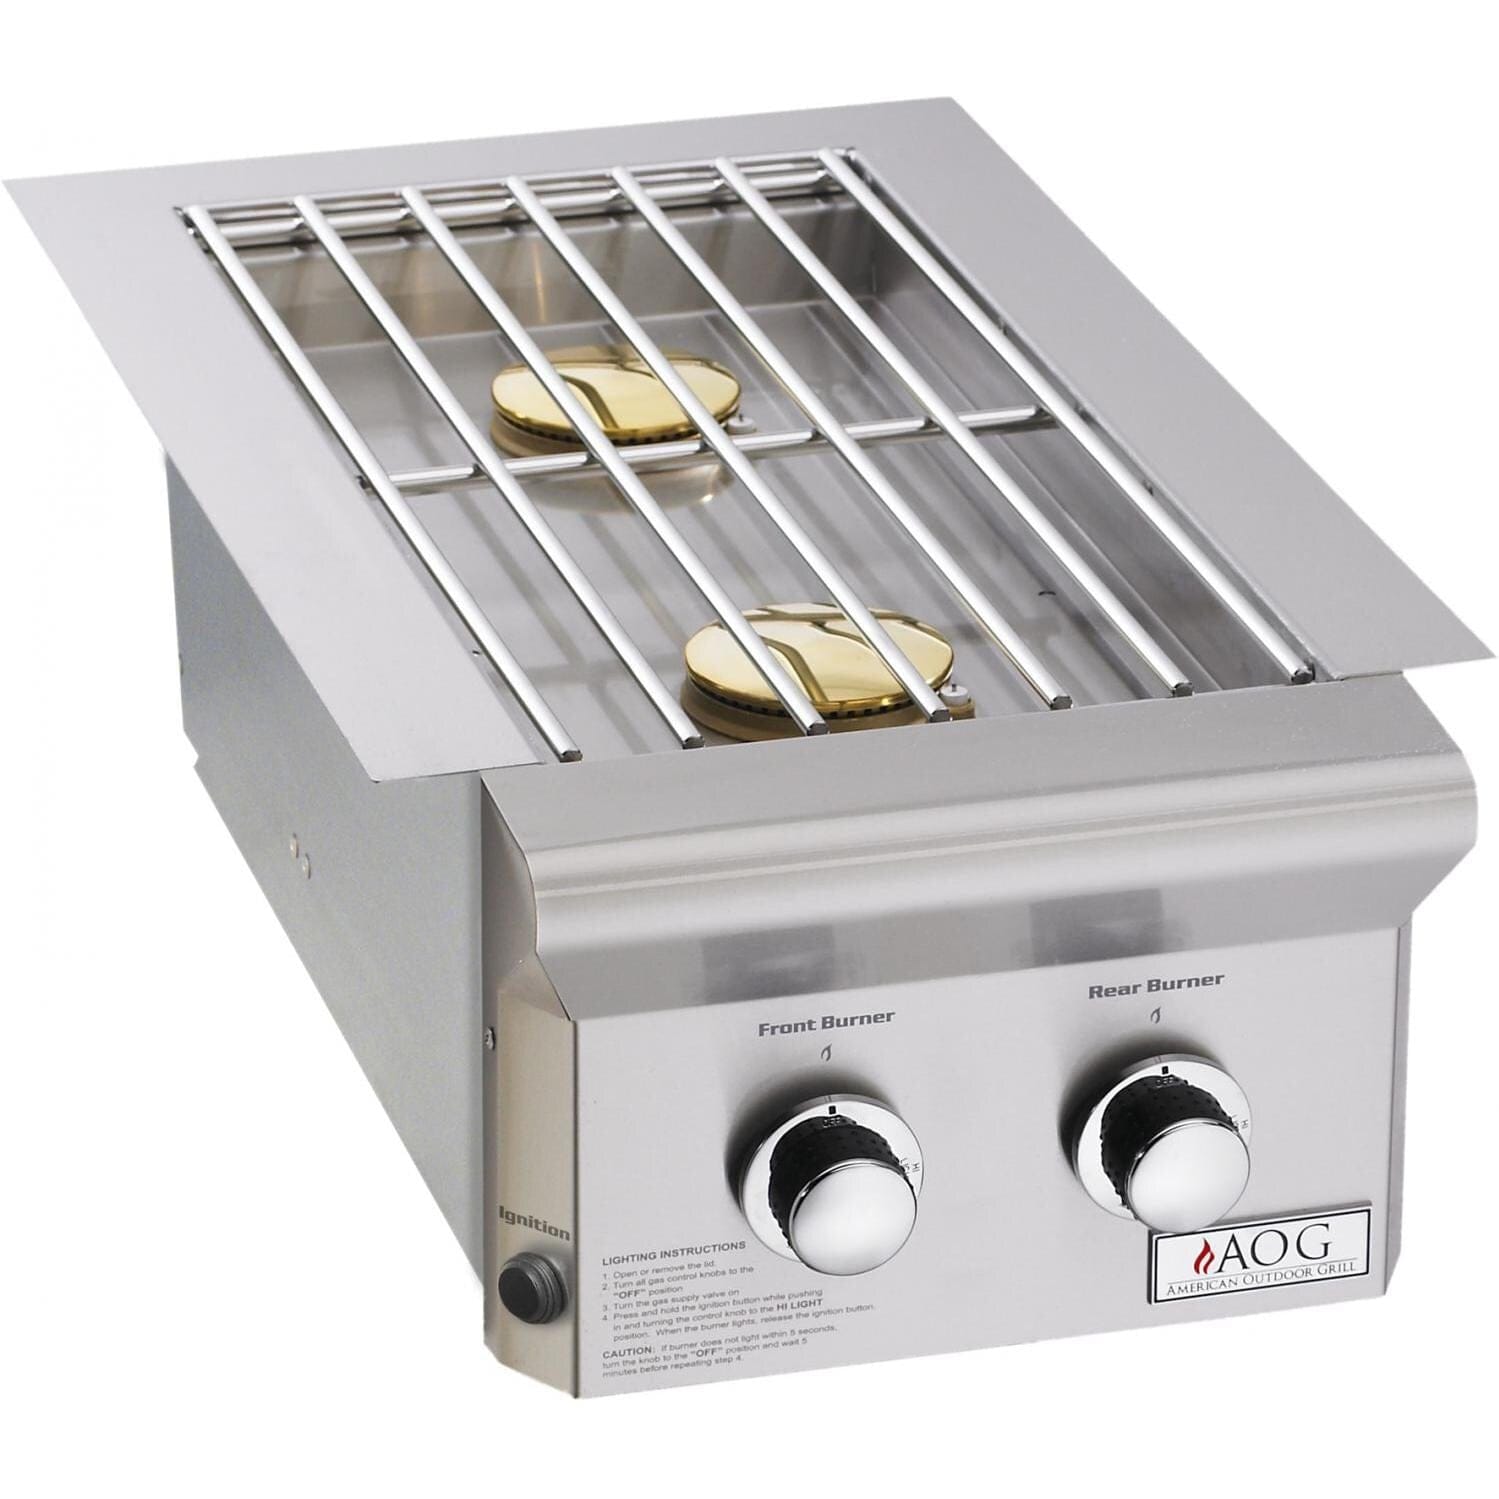 American Outdoor Grill Accessories American Outdoor Grill L-Series Built-In Double Side Burner 25,000 BTU’s -  3282L(P)